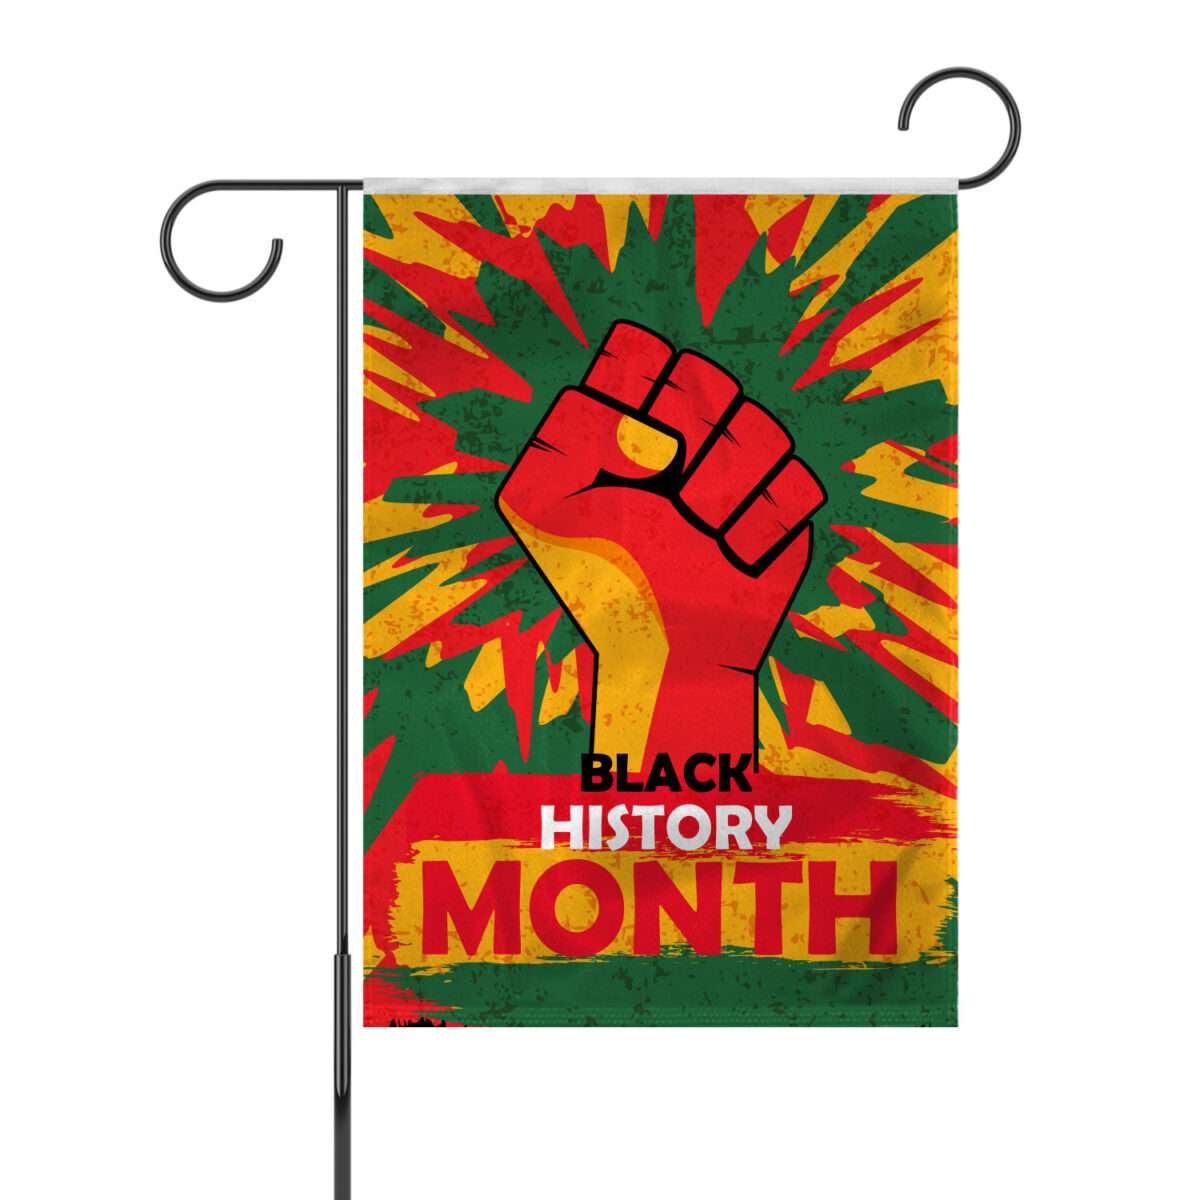 AGAS Black History Month Garden Flag Black History Month Yard Sign